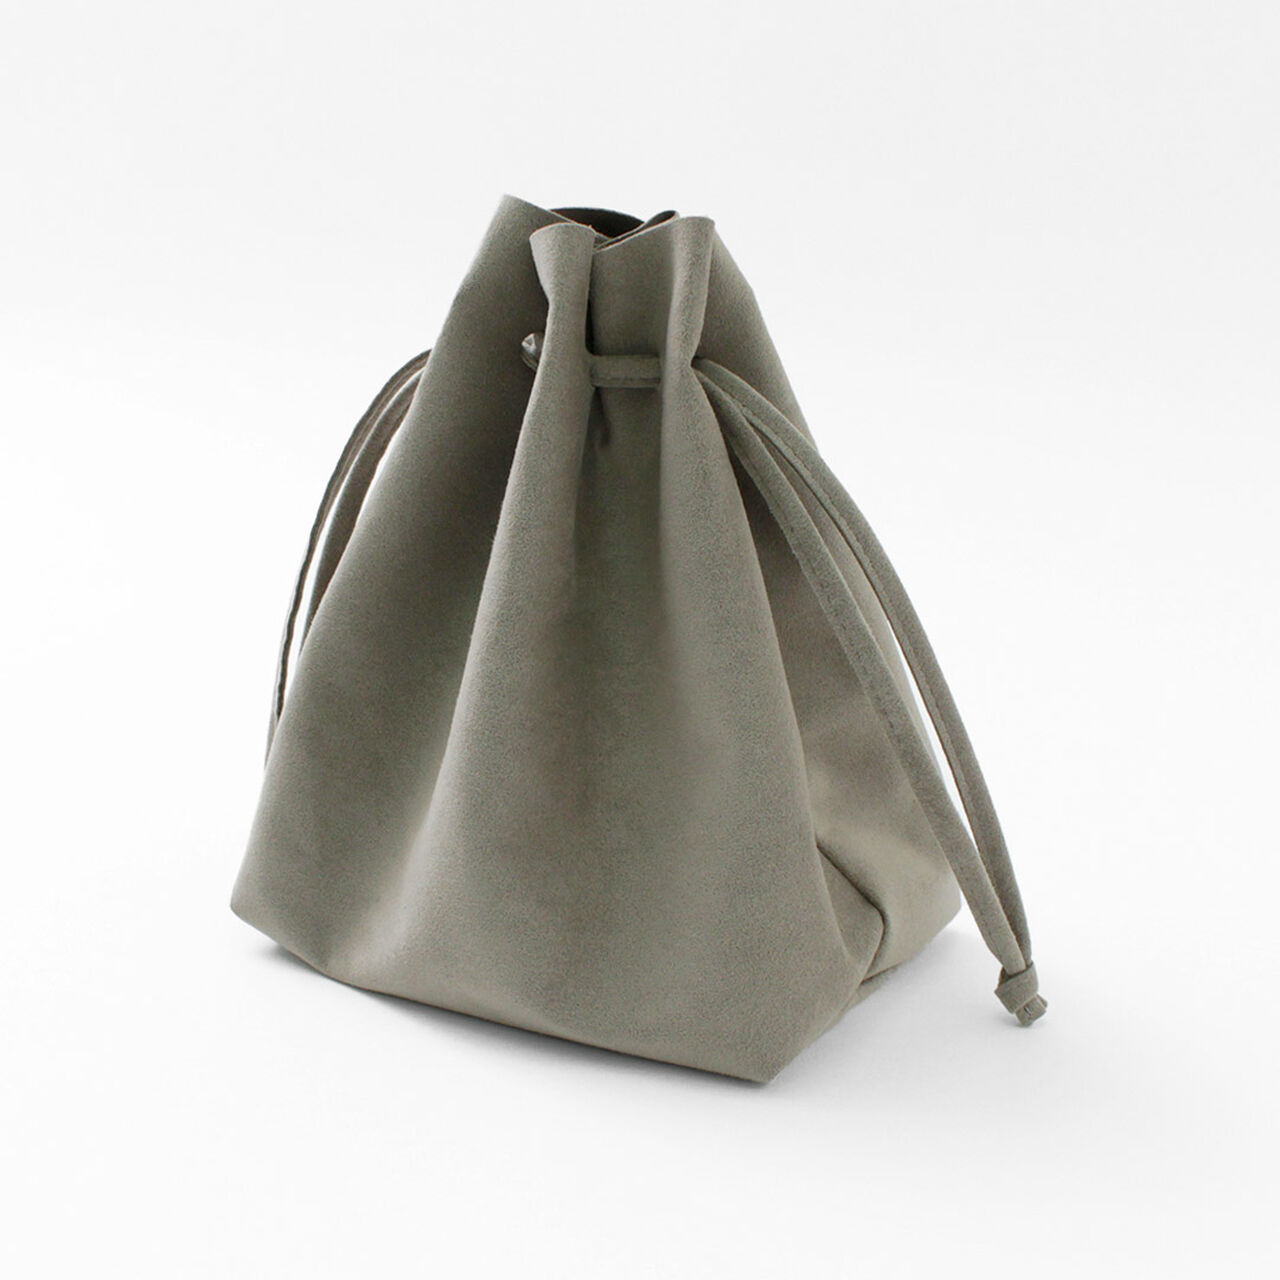 Pu Double Shoulder Bag With Drawstring Closure Casual Water Bucket